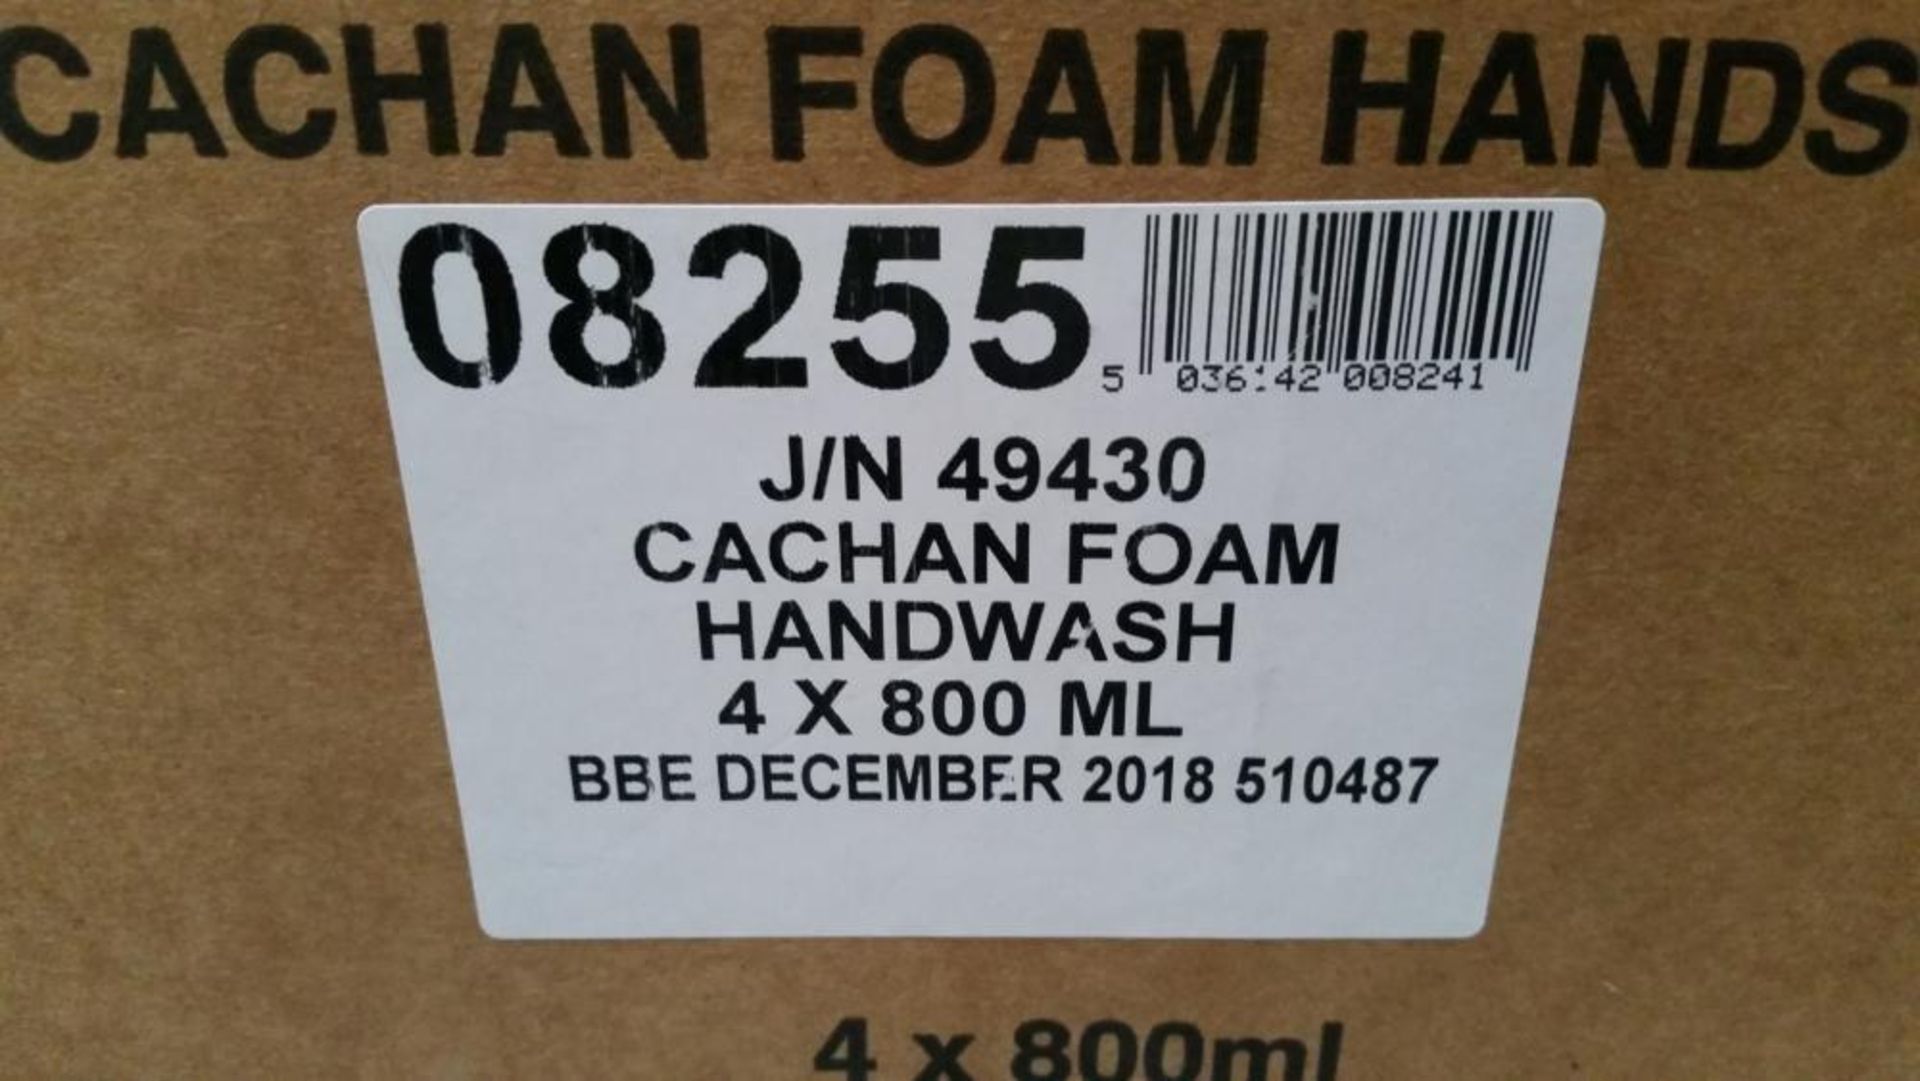 24 x Cachan Foam 800ml Handwash - Suitable For Foaming Dispnesers - Expiry December 2018 - Includes - Image 2 of 5